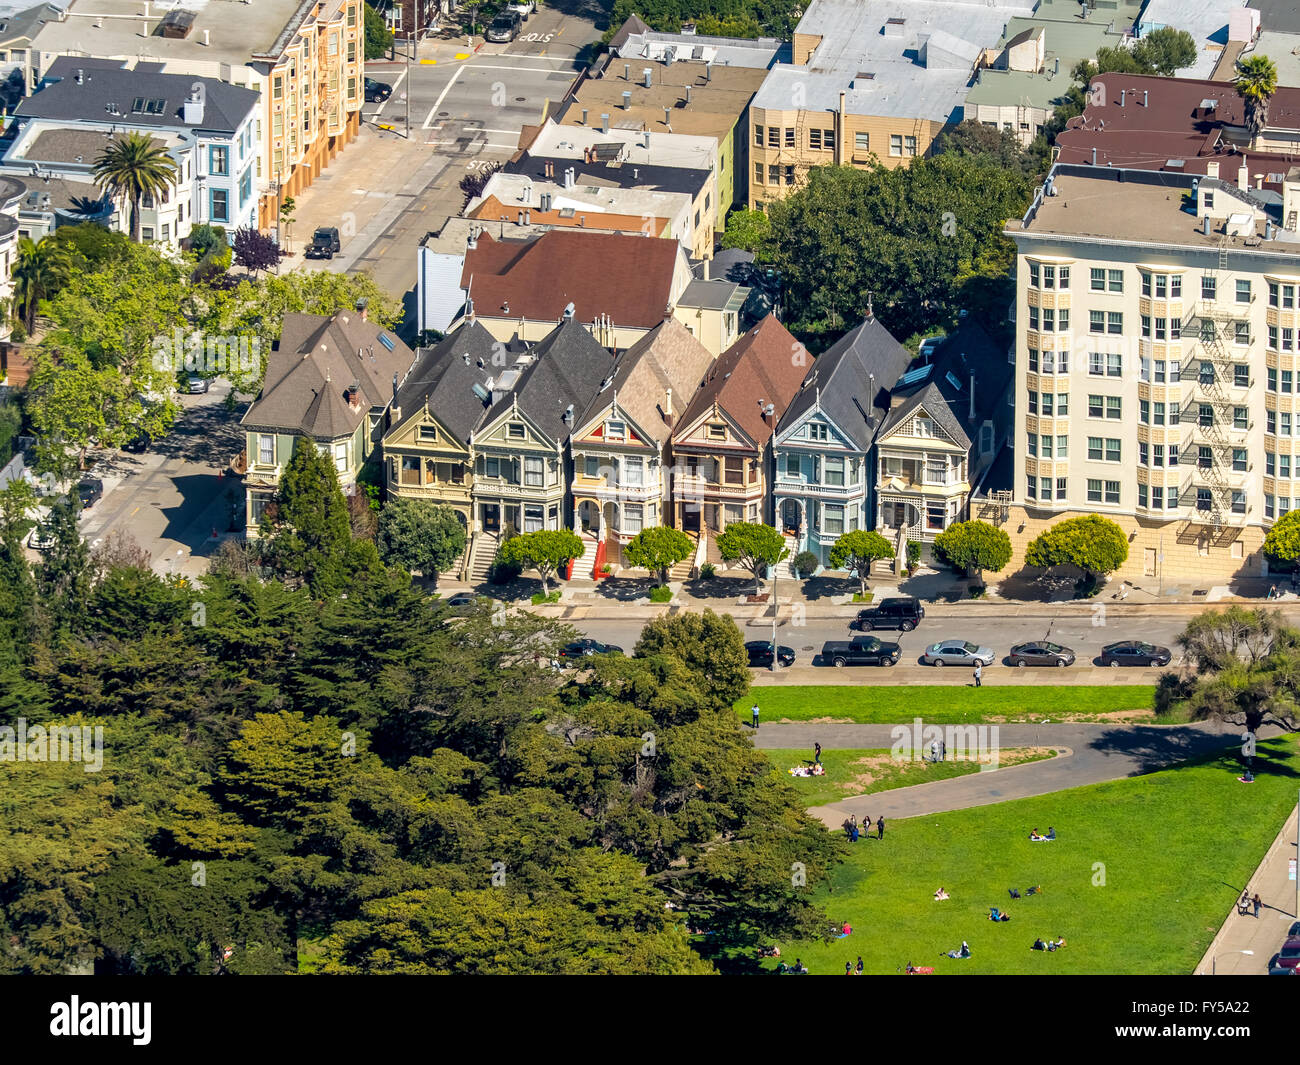 Aerial view of the Painted Ladies at Steiner Street, Victorian Houses, San Francisco, San Francisco Bay Area, California, USA Stock Photo